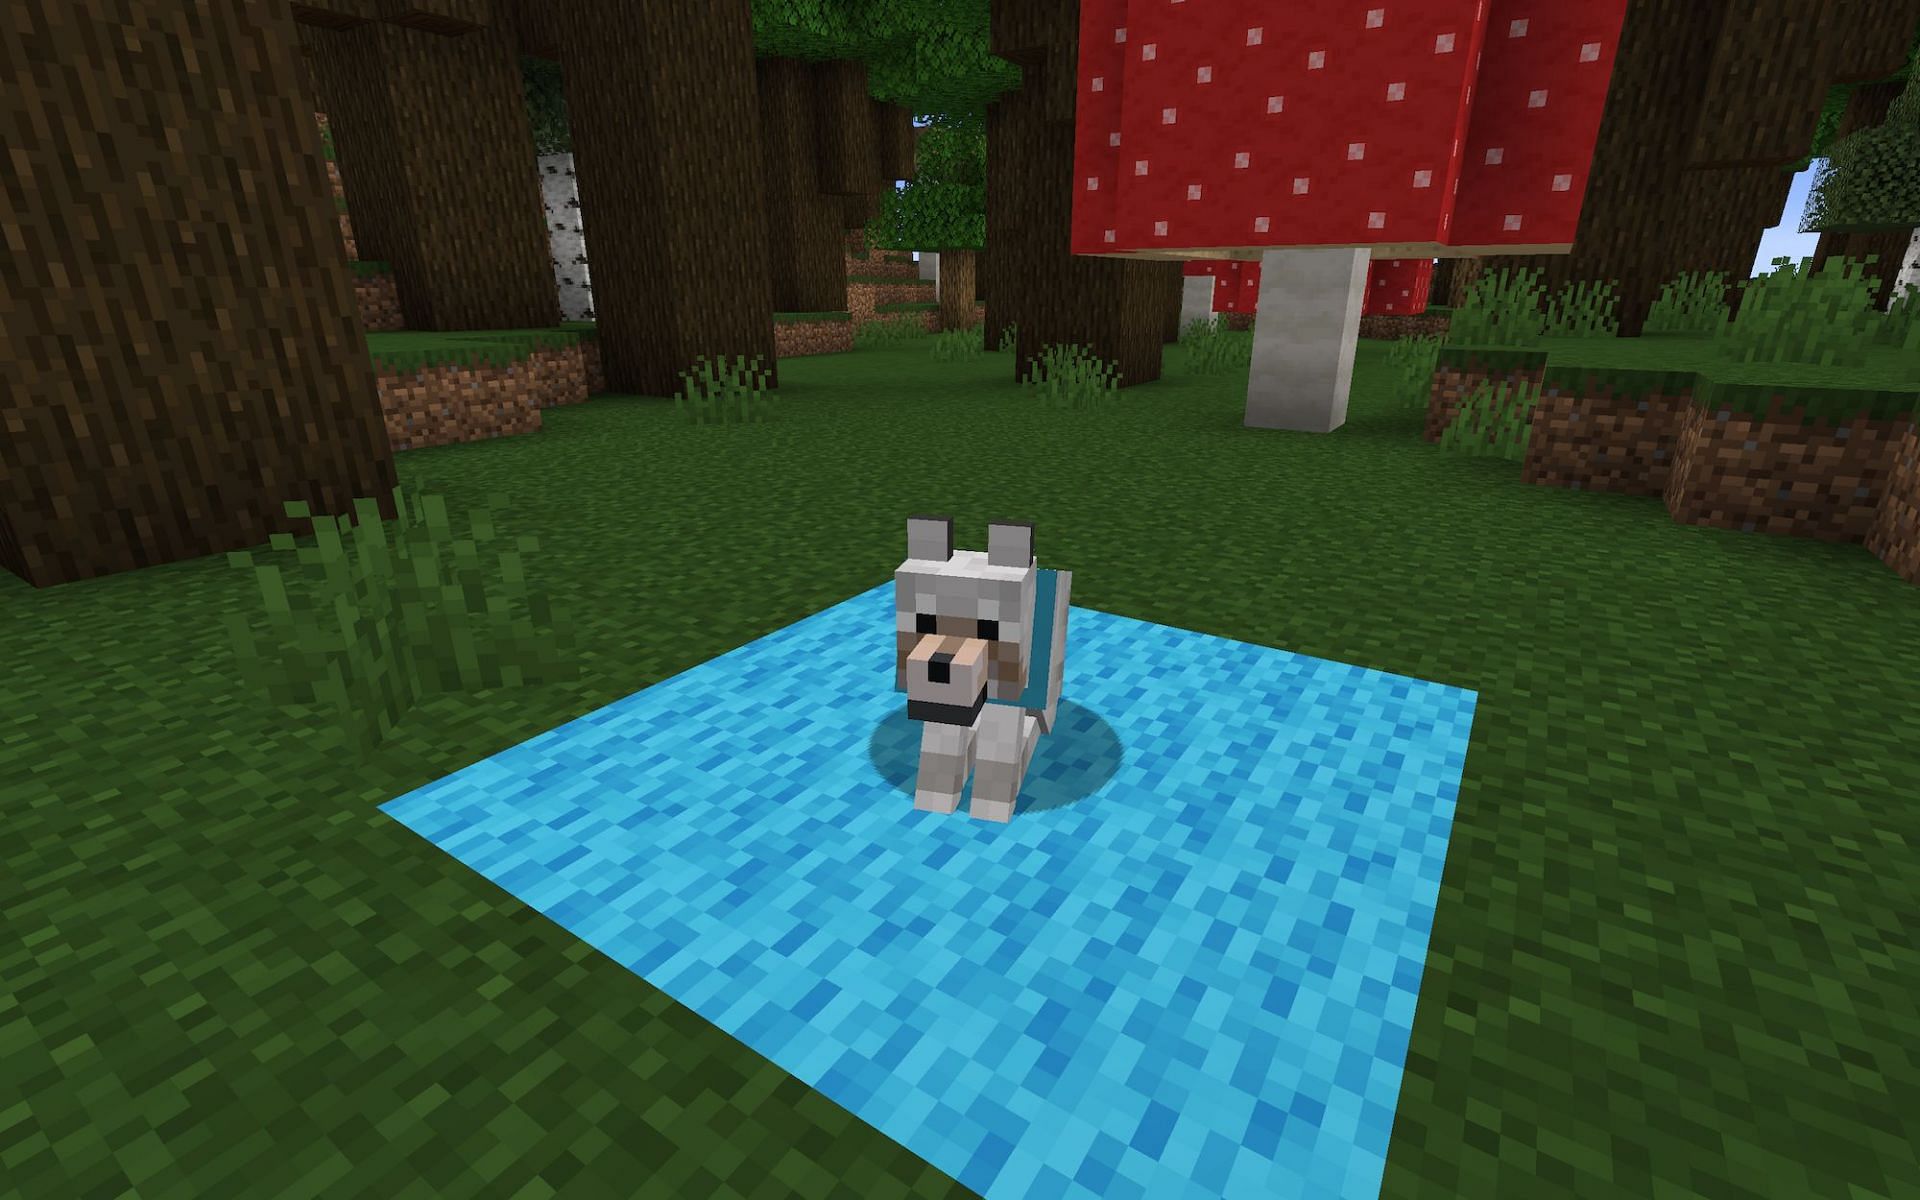 Wolf with a blue collar [Image via Minecraft]